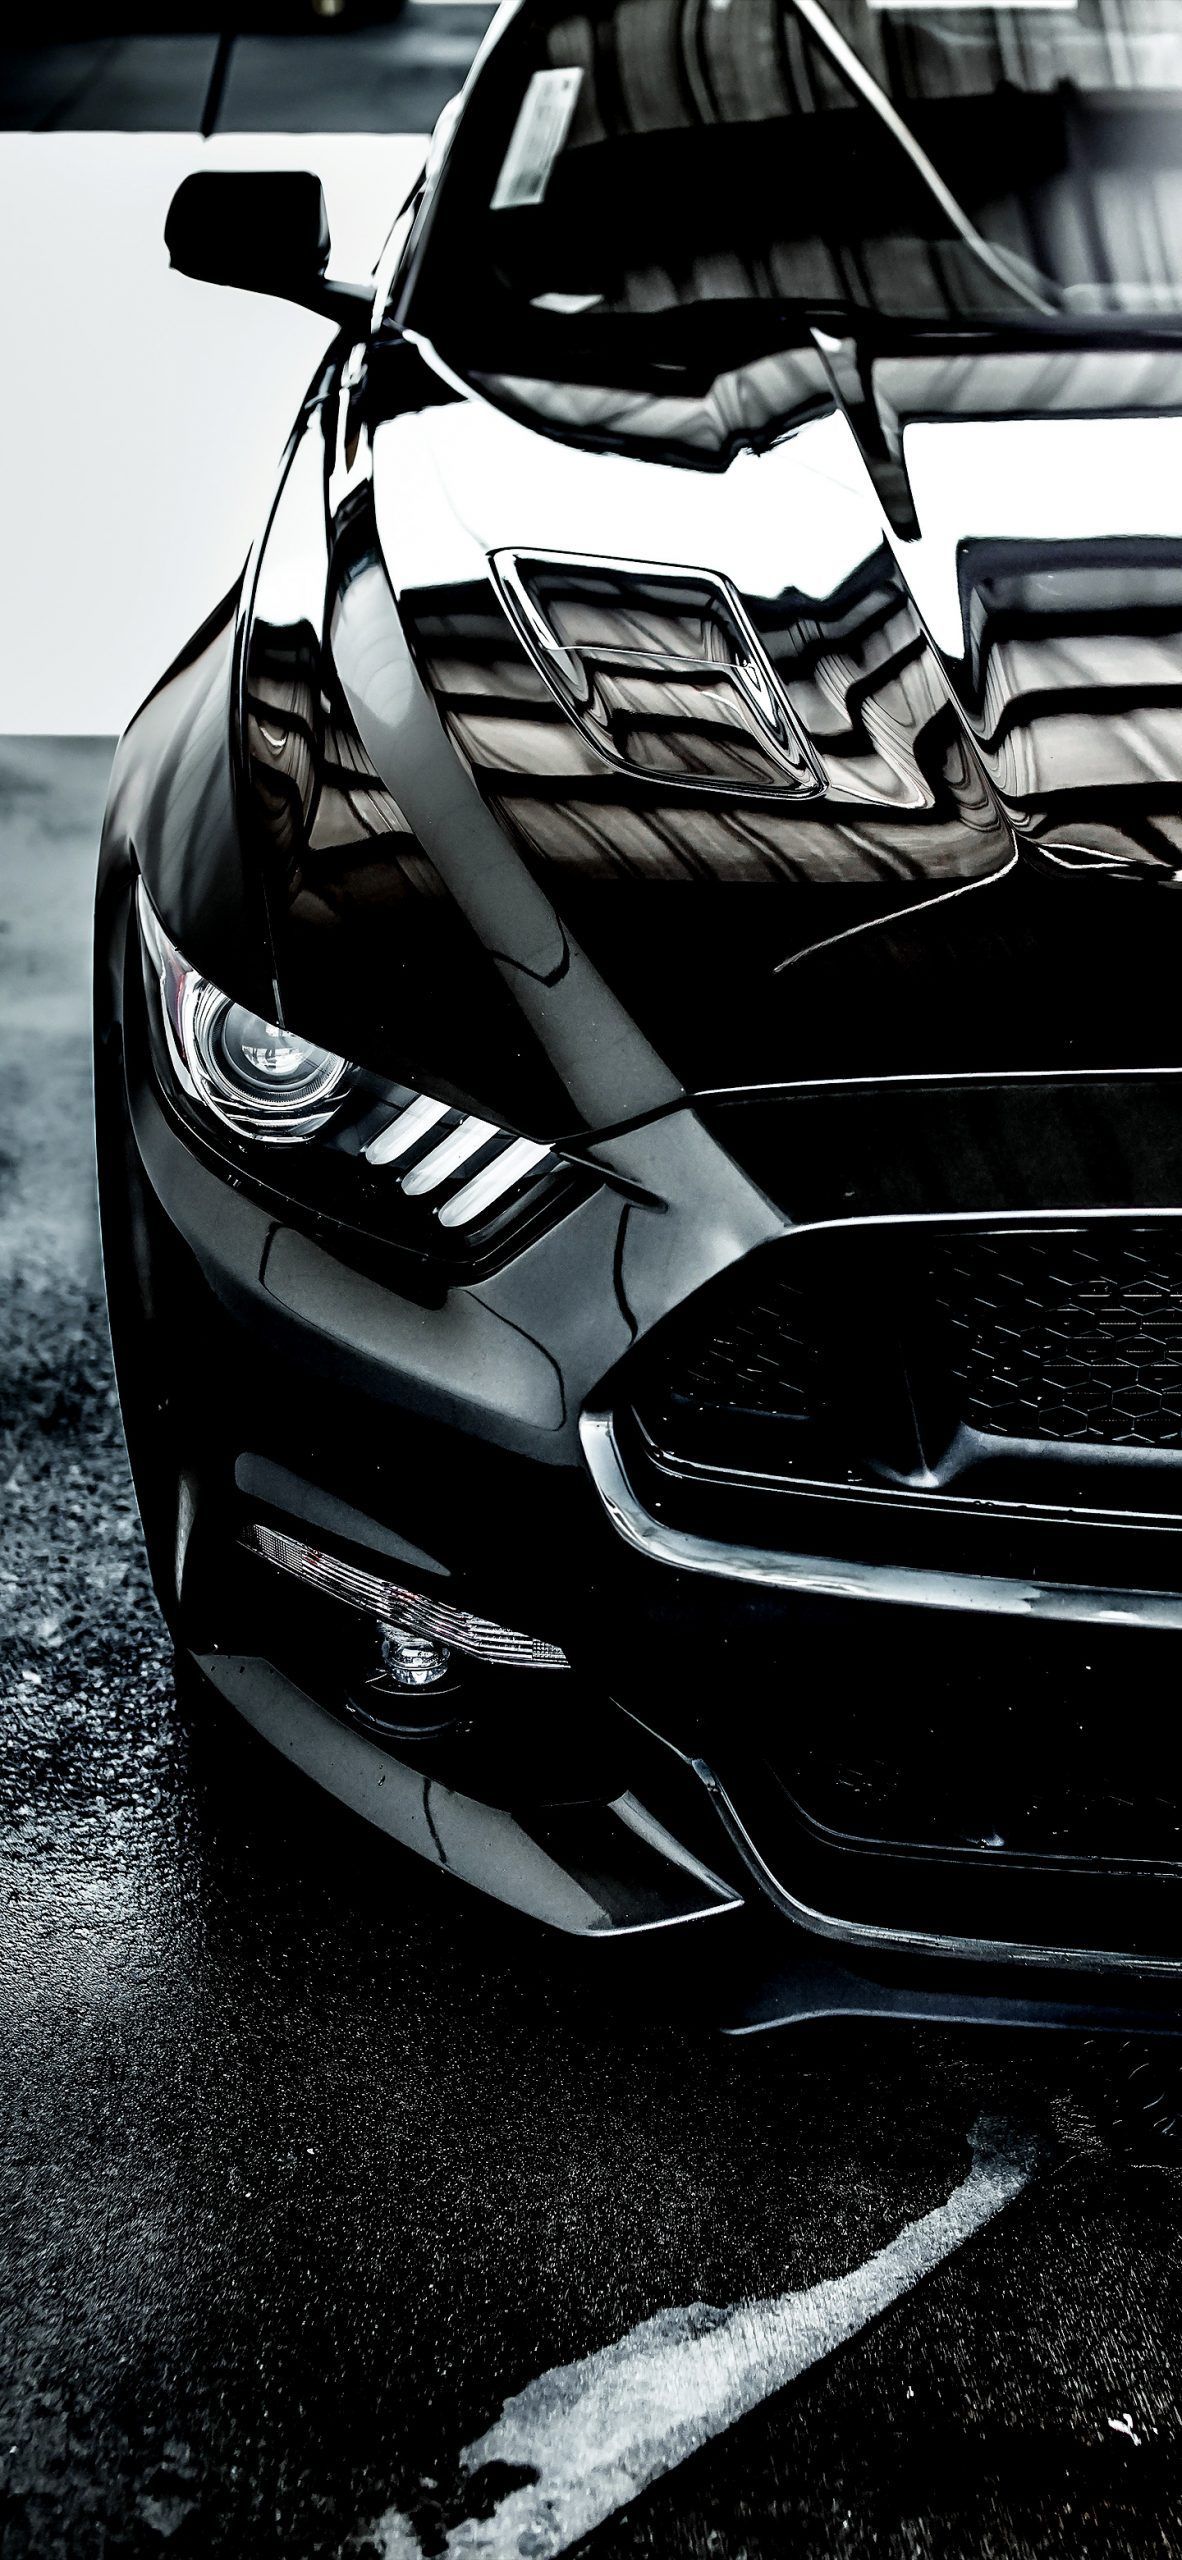 Ford Mustang. Ford mustang wallpaper, Car iphone wallpaper, Mustang wallpaper